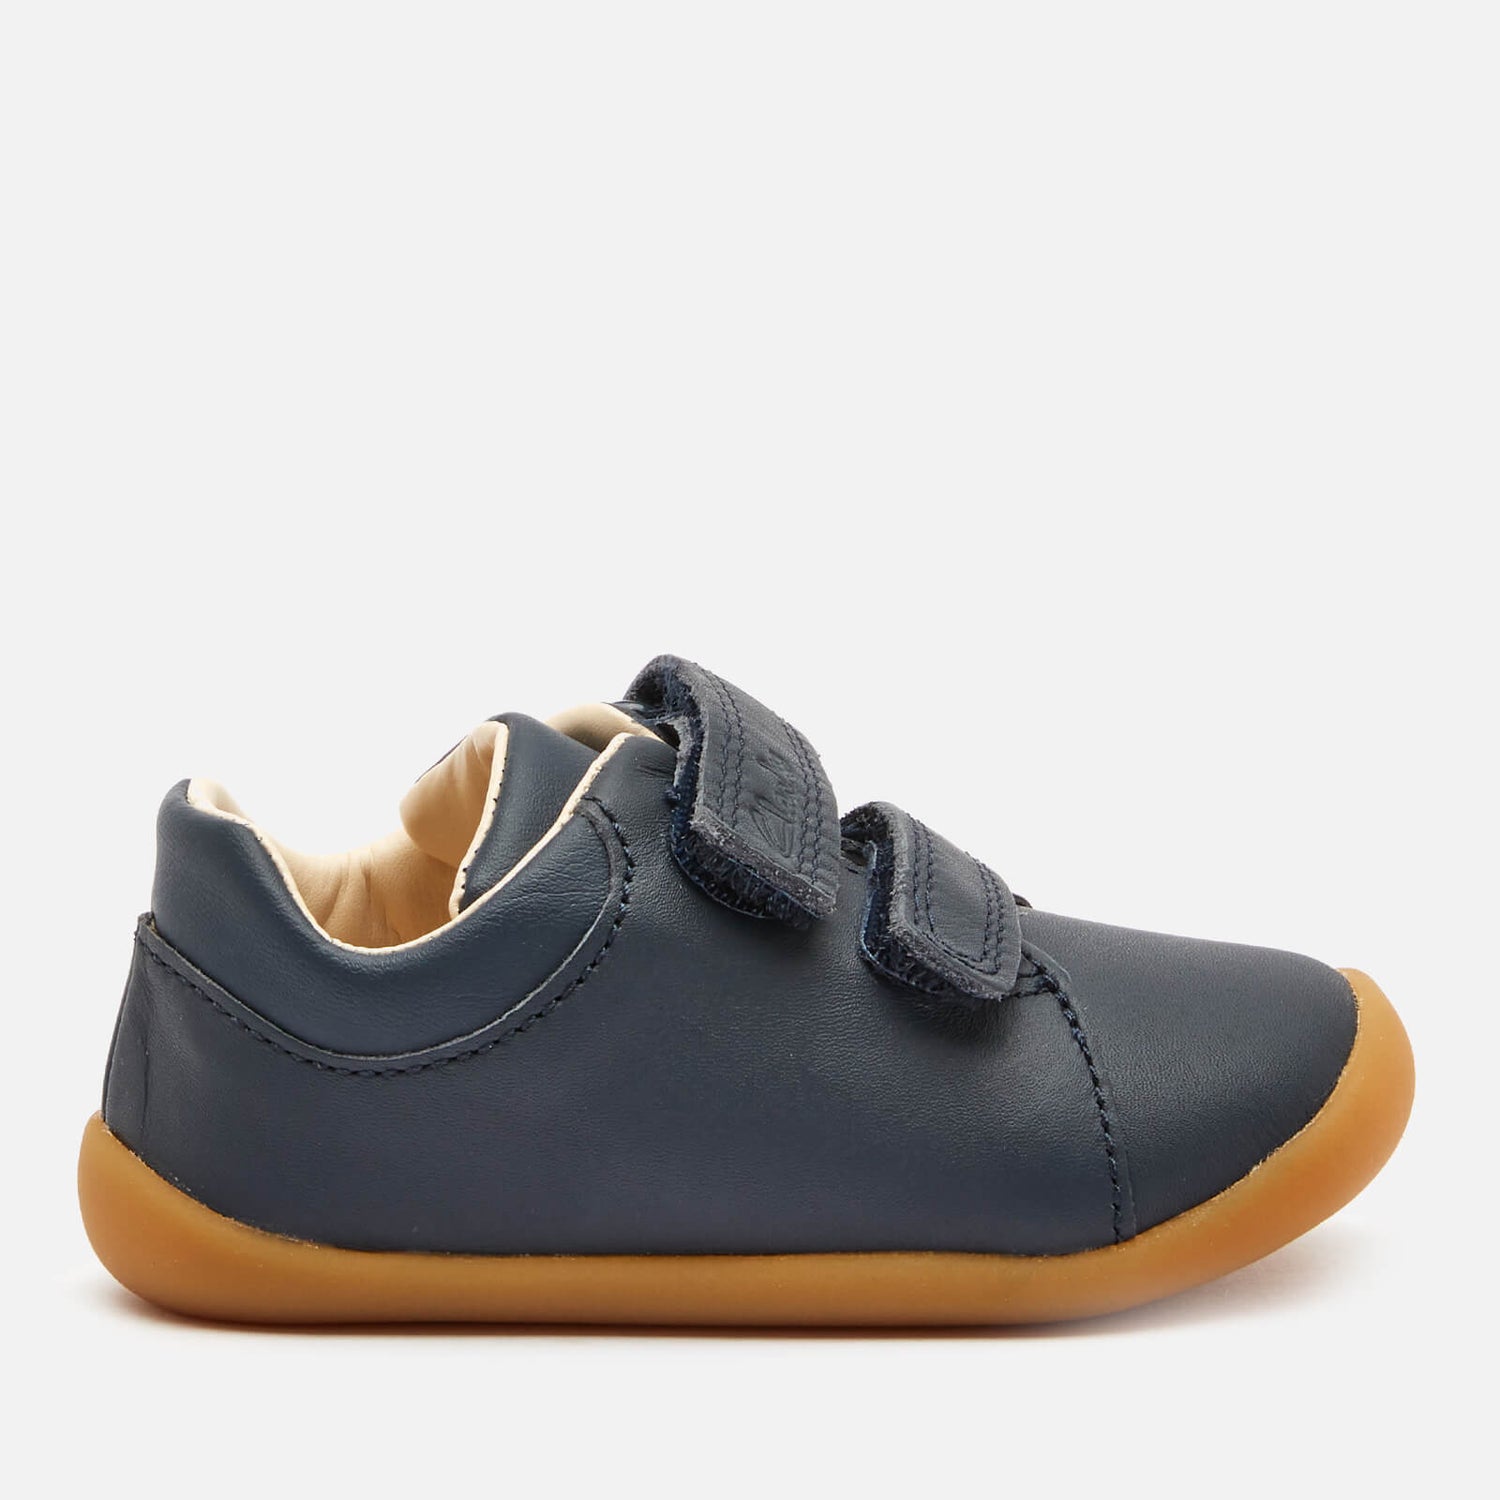 Clarks Roamer Craft Toddler Everyday Shoes - Navy Leather